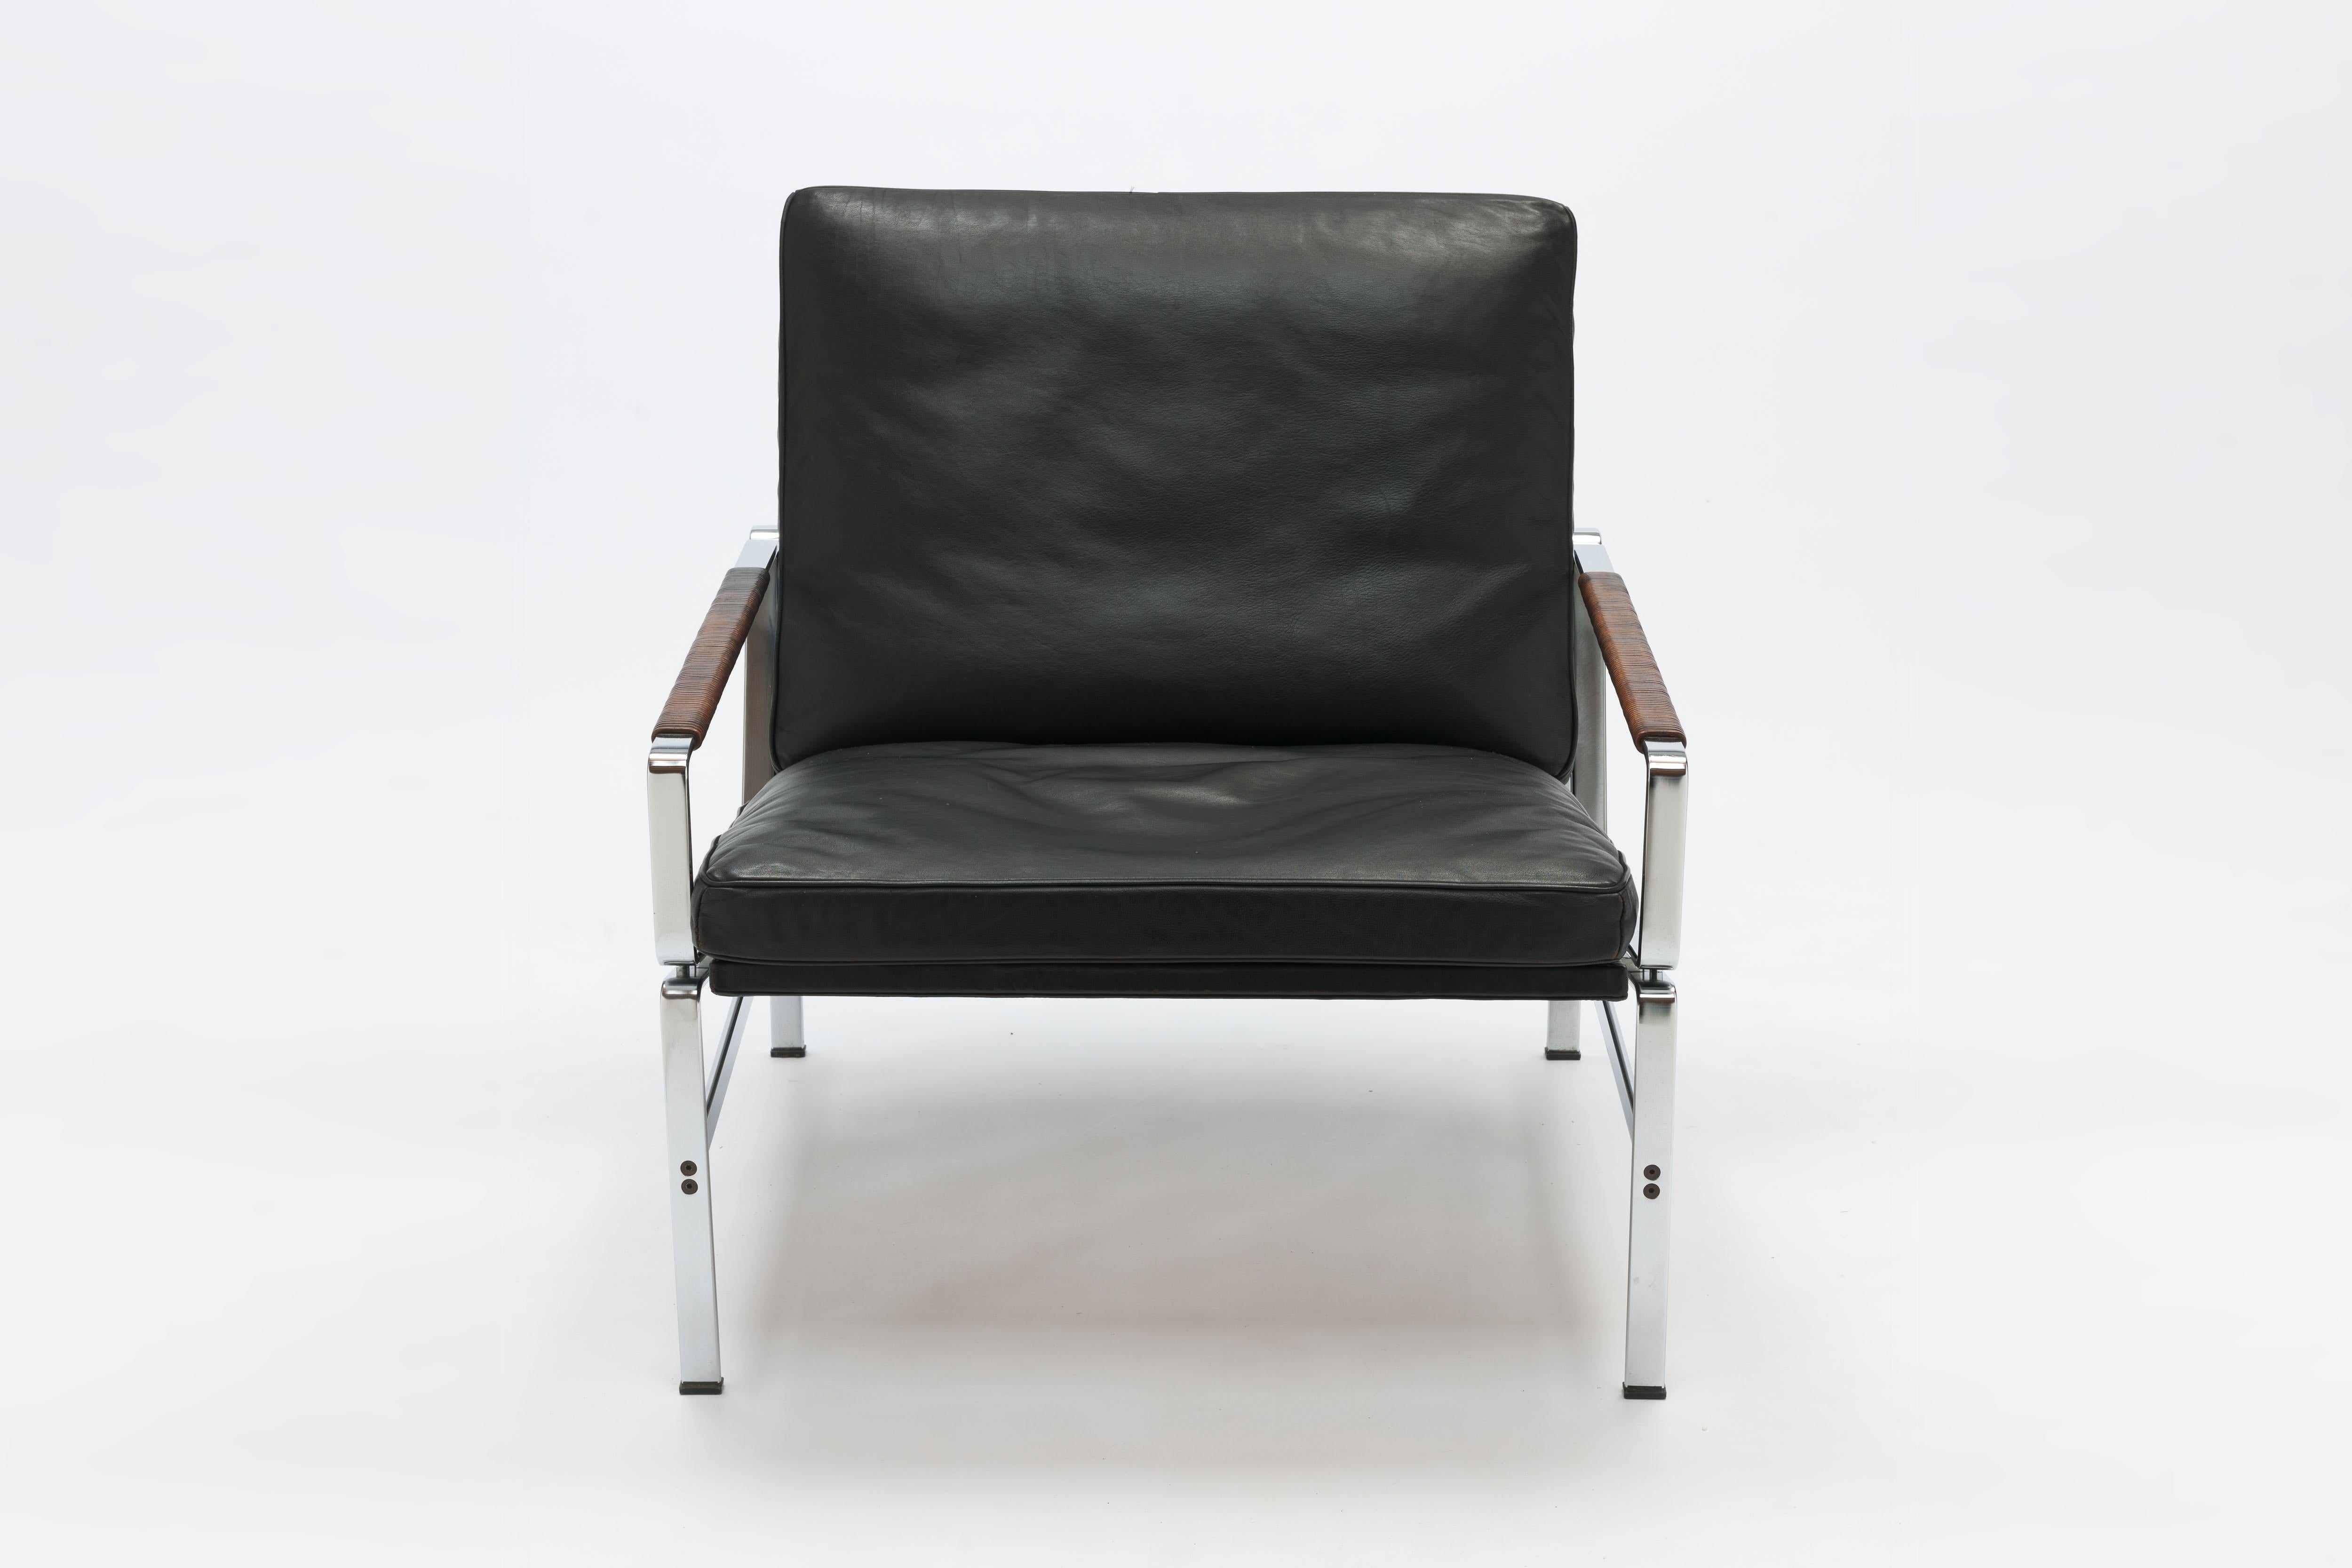 One of the most refined modern design Danish armchairs is this model 6720 arm chair by Designers Preben Fabricius & Jørgen Kastholm from 1965. This arm chair was designed part of a modular seating system that contained 2, 3 and 4-seat sofa's. The